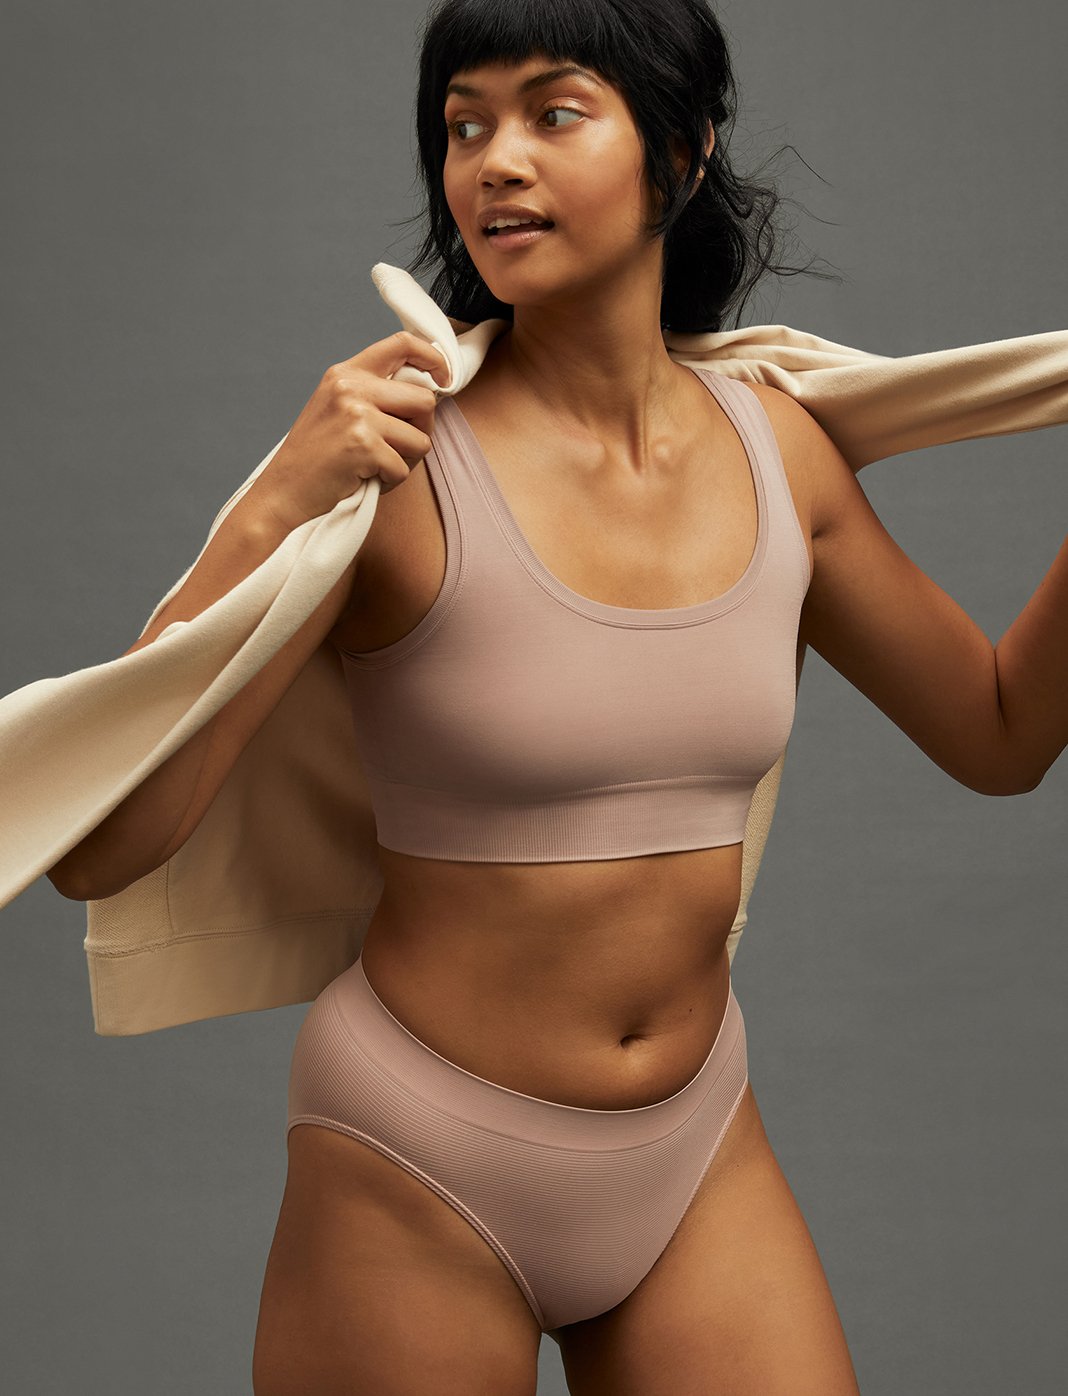 ThirdLove Just Dropped a New Seamless Underwear Line: Shop the Collection